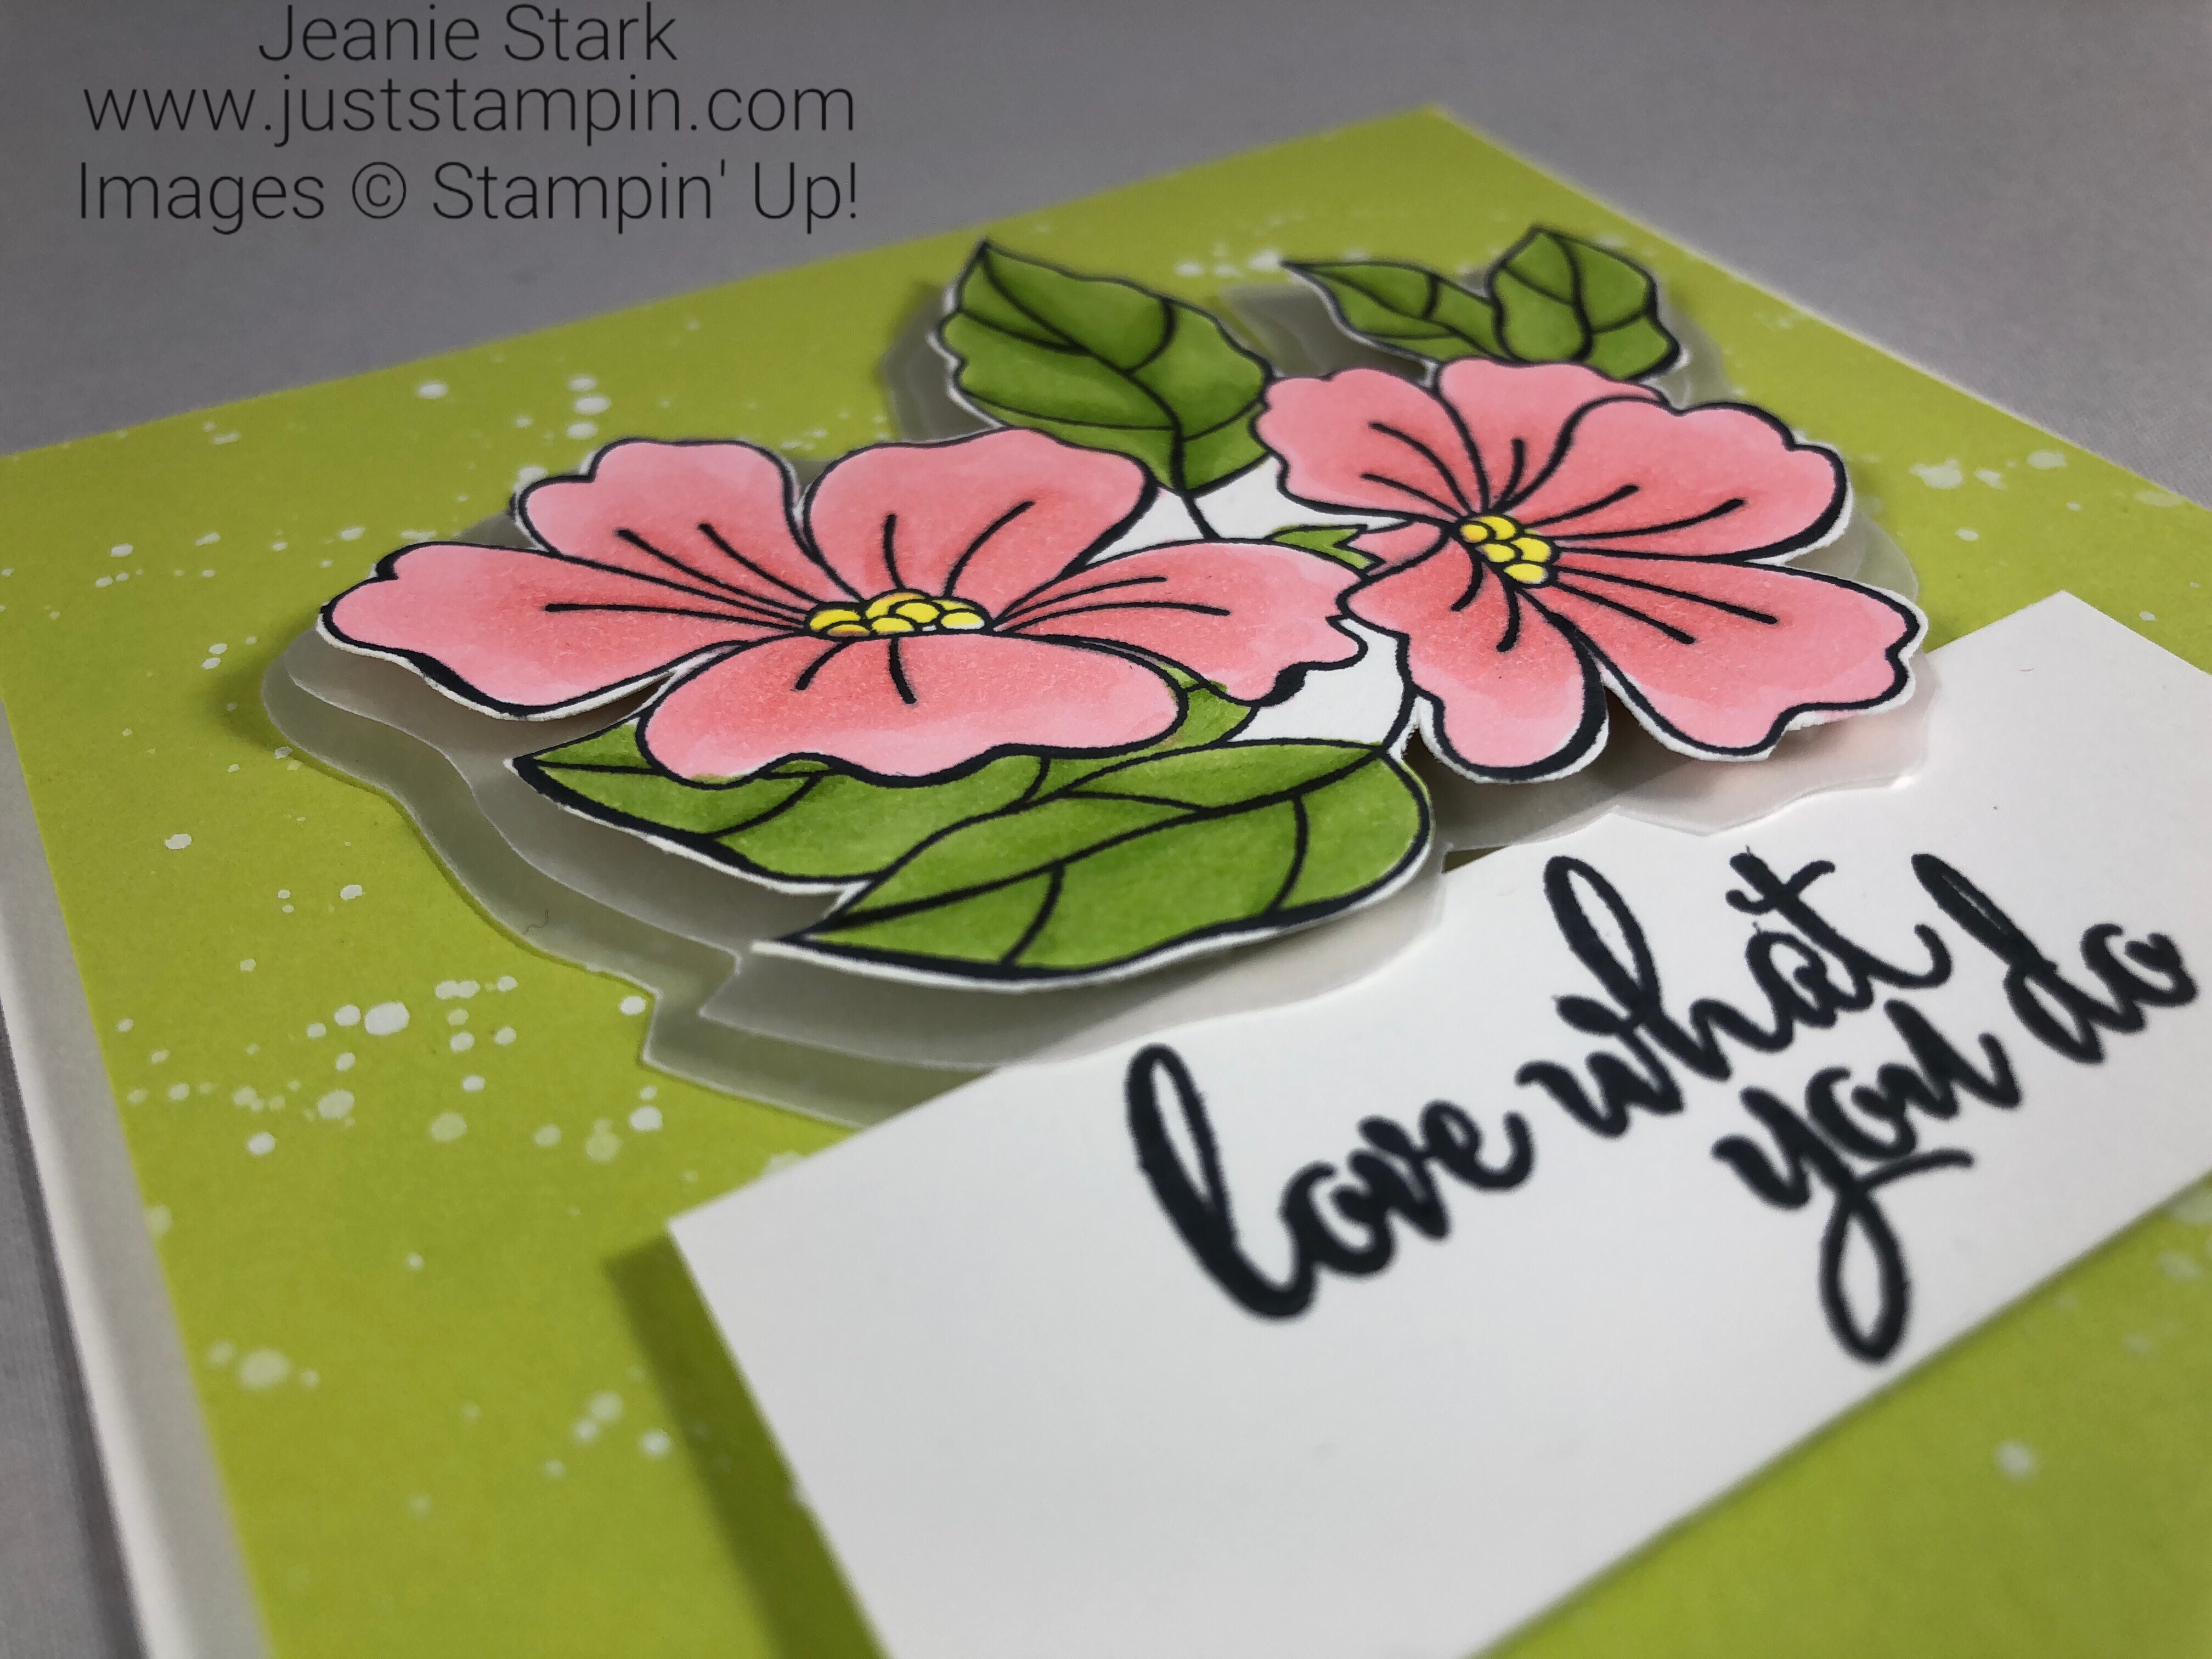 Stampin Up Blended Seasons and Love What You Do floral card idea colored with Stampin Blends - Jeanie Stark StampinUp